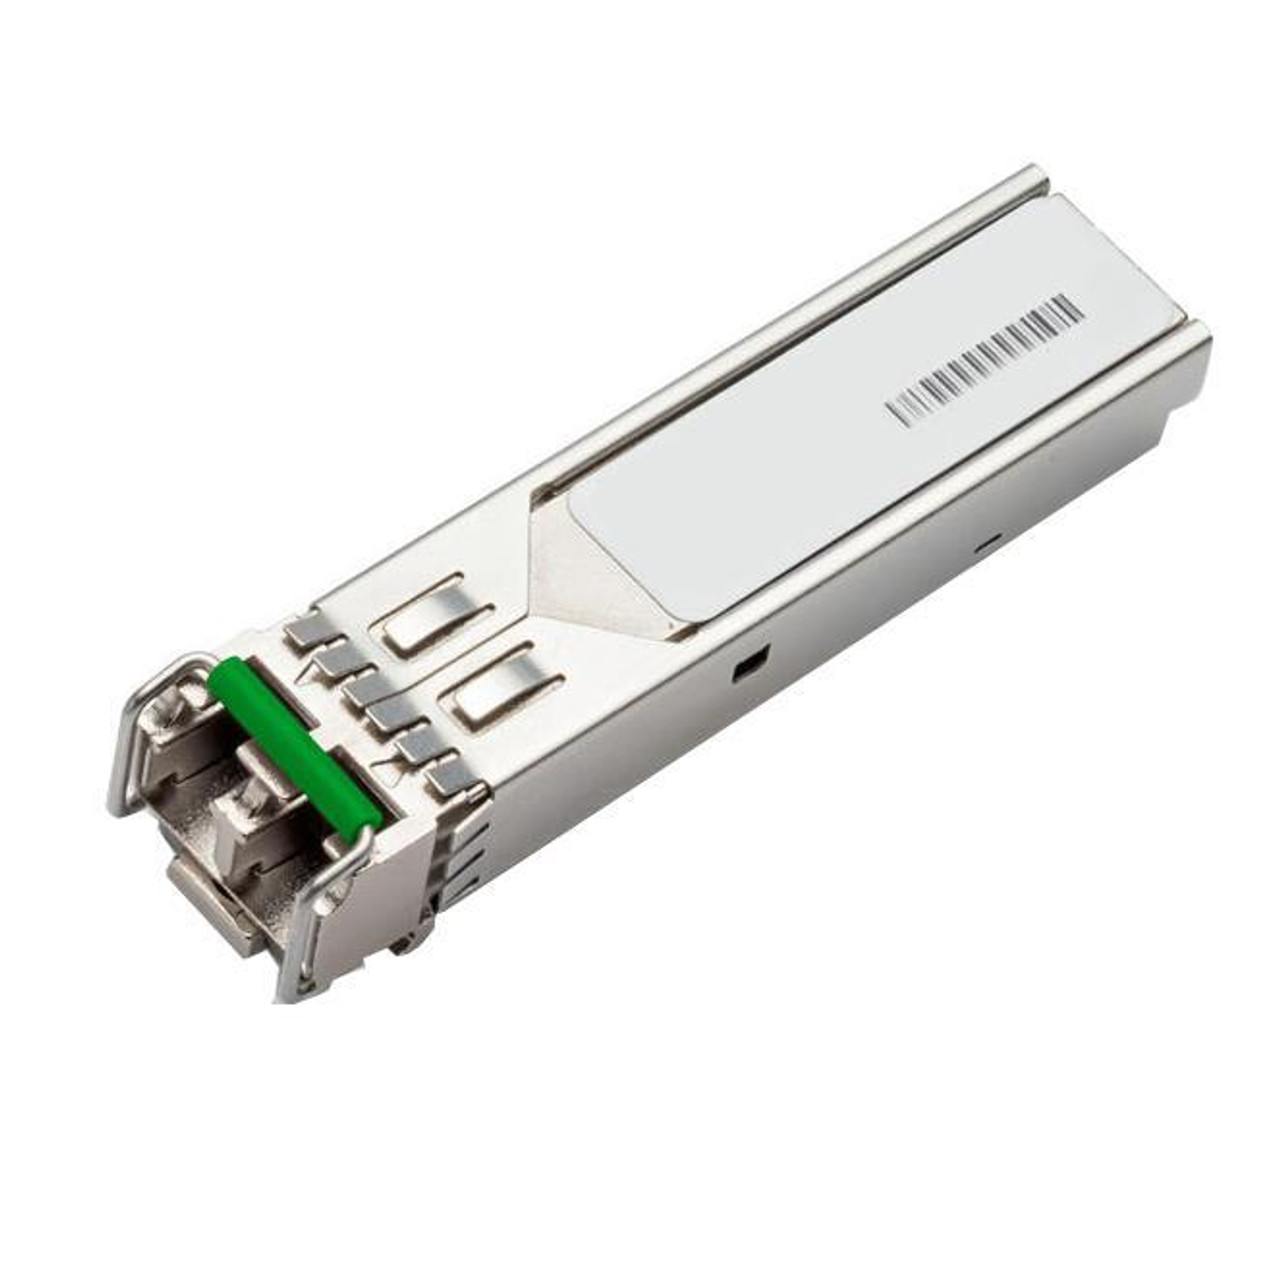 100-01673-ACC Accortec 1.25Gbps 1000Base-BX-D Single-mode Fiber 60km 1490nmTX/1310nmRX LC Connector SFP Transceiver Module for Calix Compatible